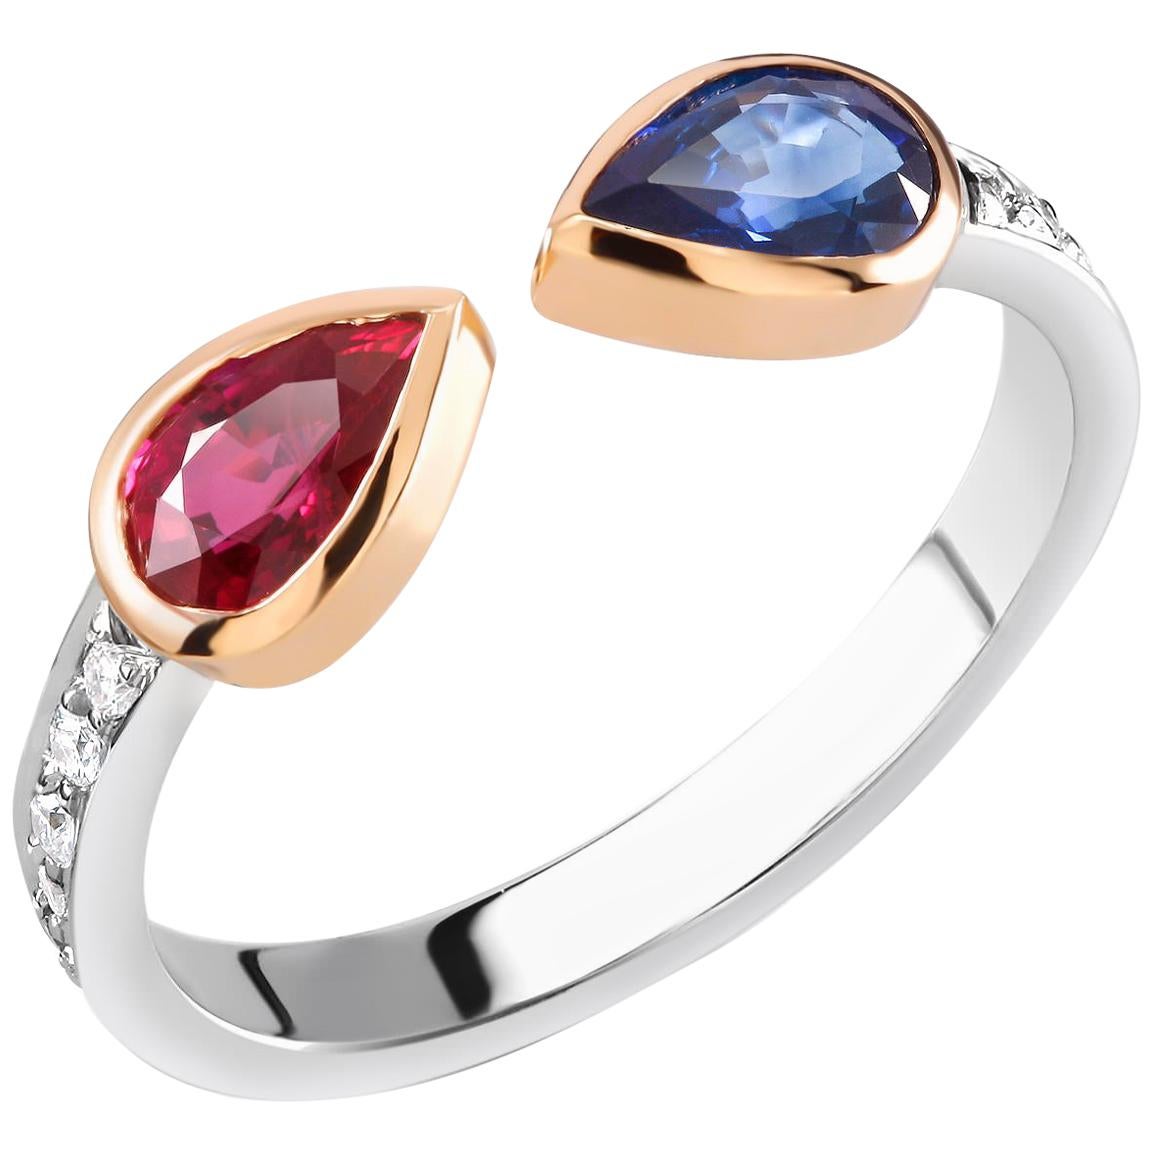 Two-Tone Gold Diamond Ruby Sapphire Ring Weighing 1.45 Carat